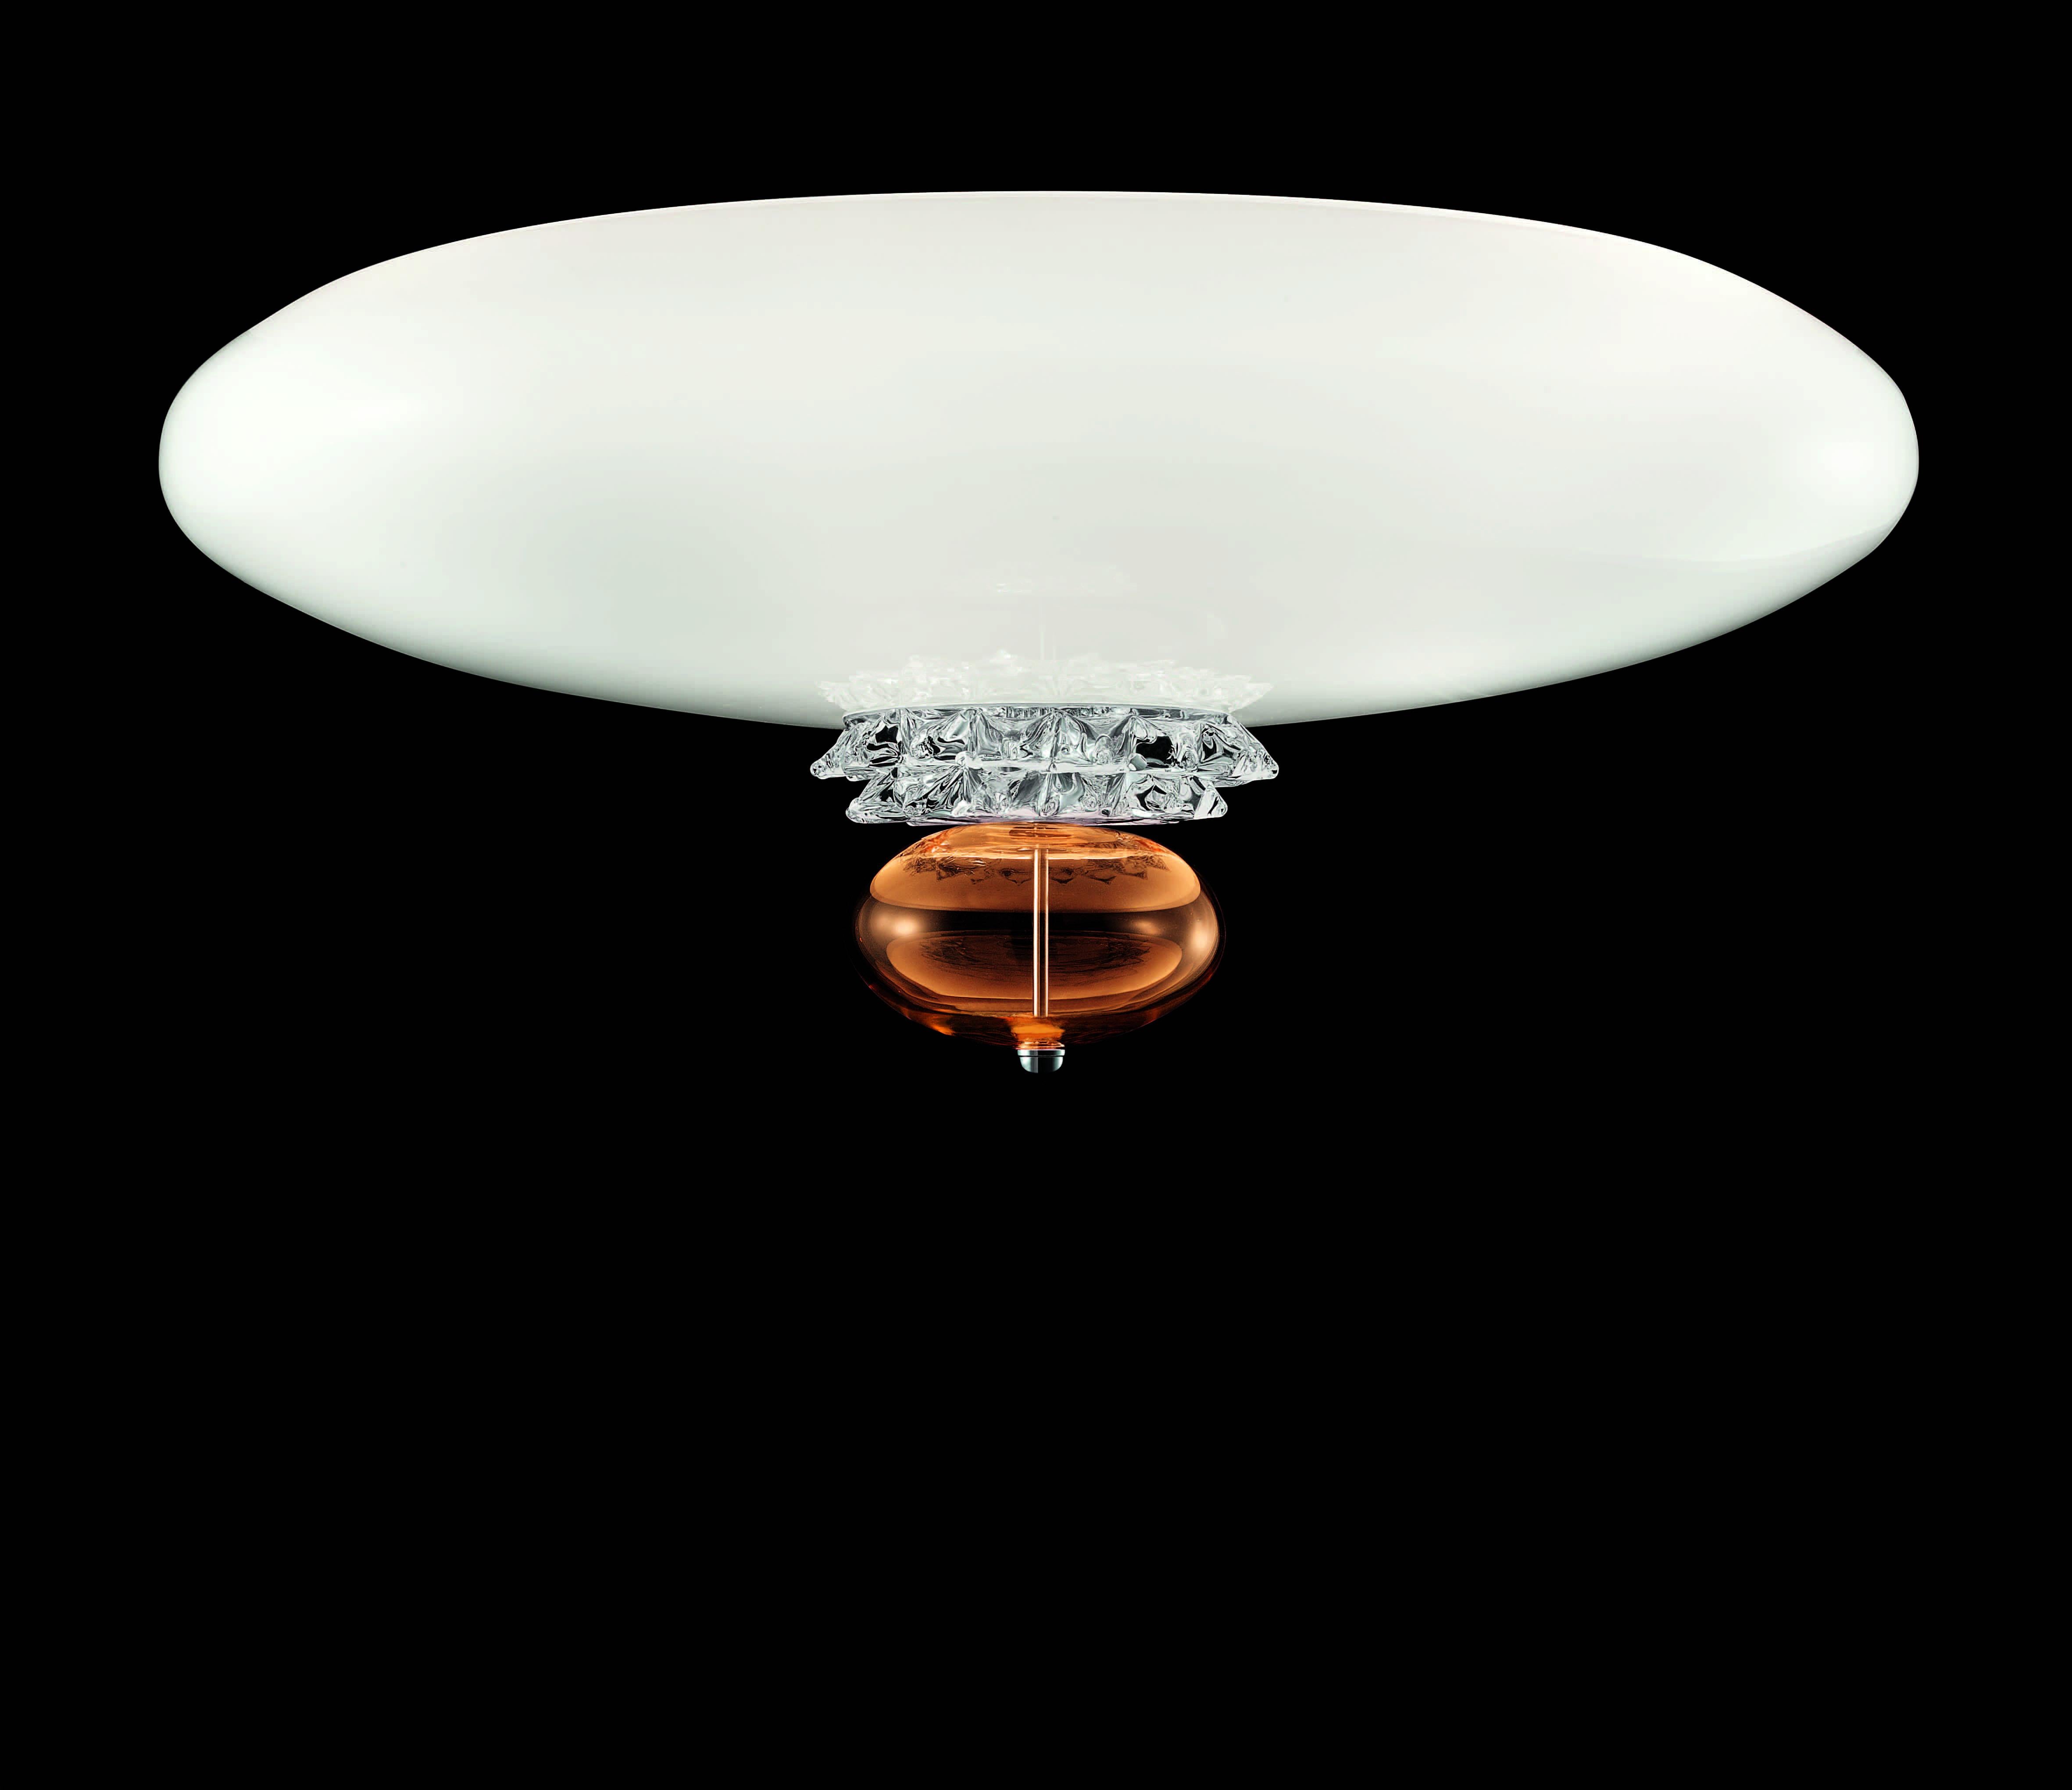 Orange (Caramel/White_AY) Anversa 5698 Ceiling Lamp in Chrome and Glass, by Barovier&Toso 2